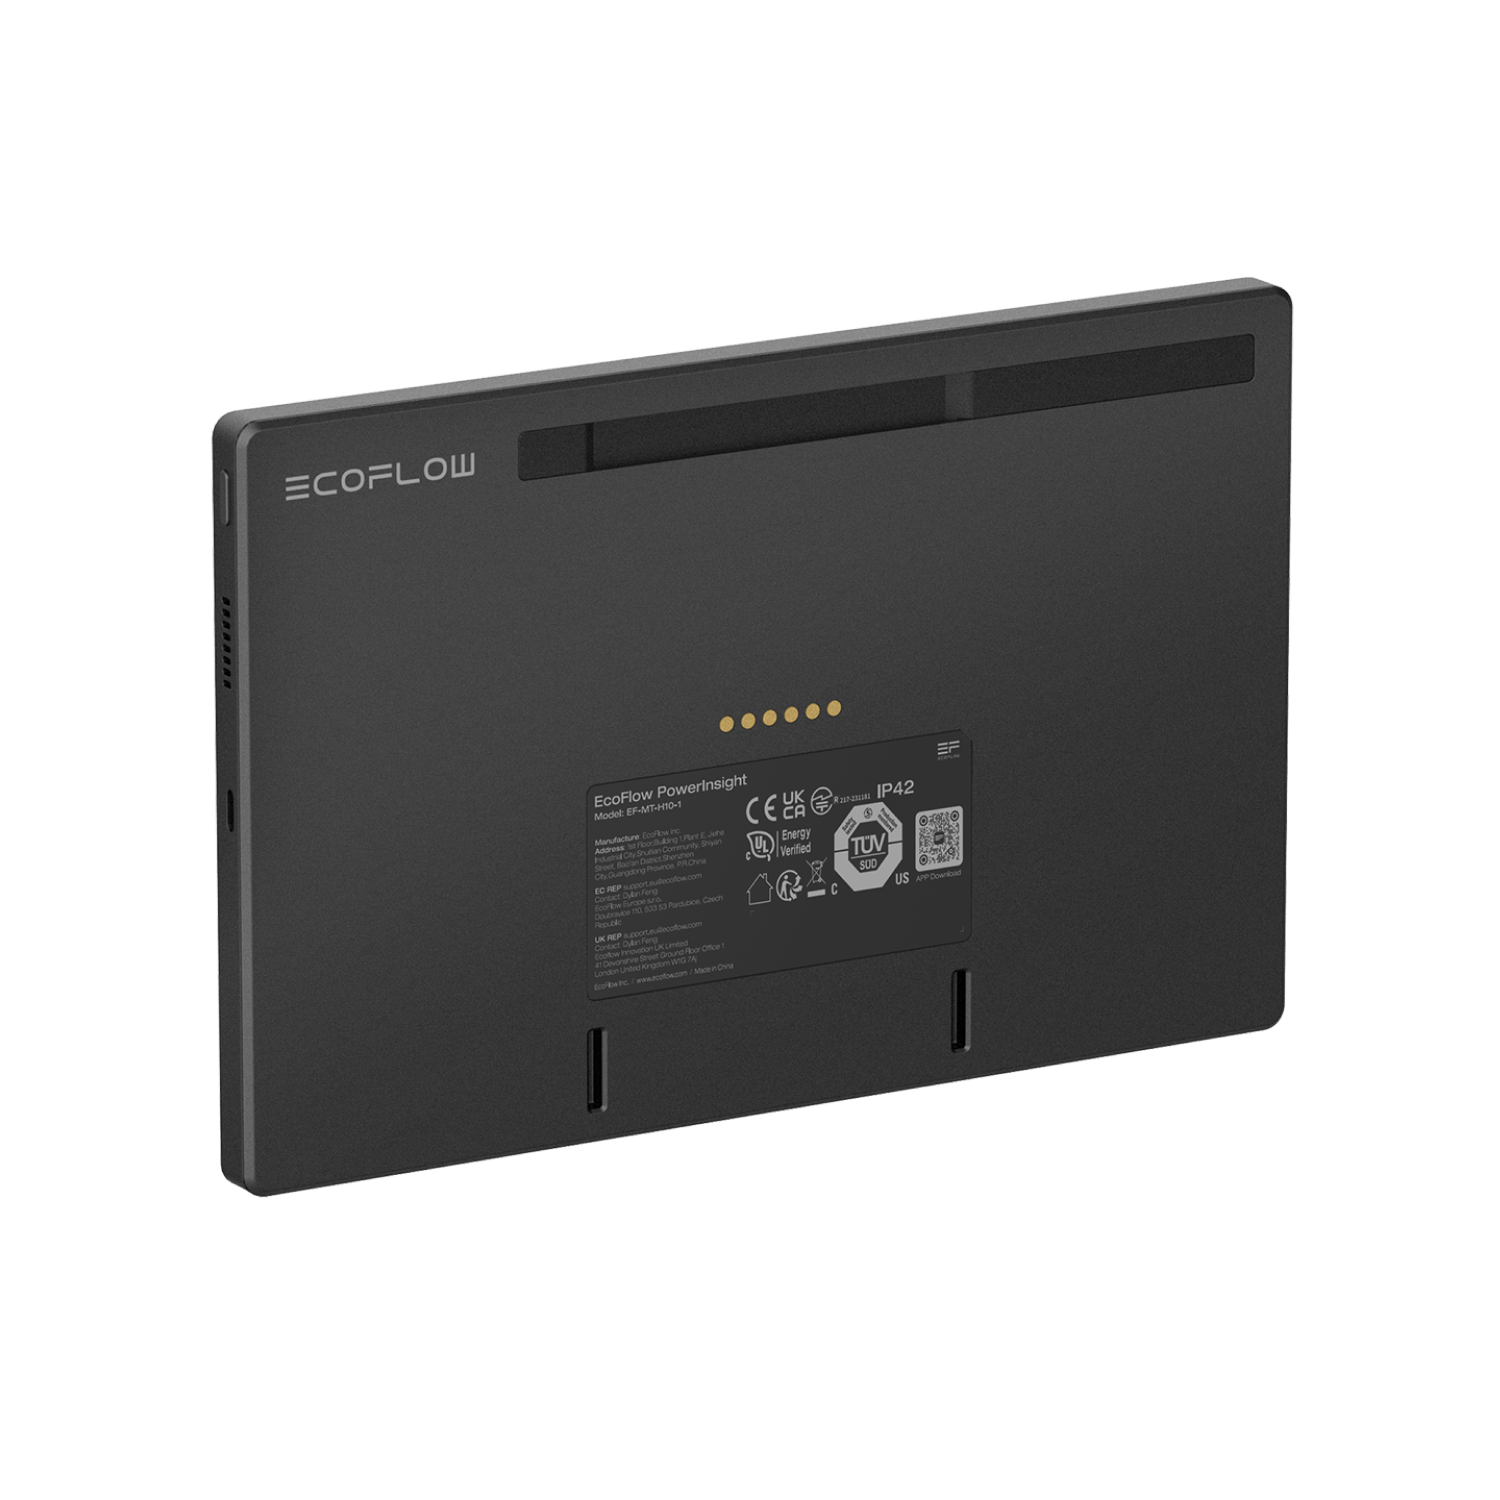 EcoFlow EcoFlow PowerInsight Home Energy Manager (Recommended Accessory) Giving Back